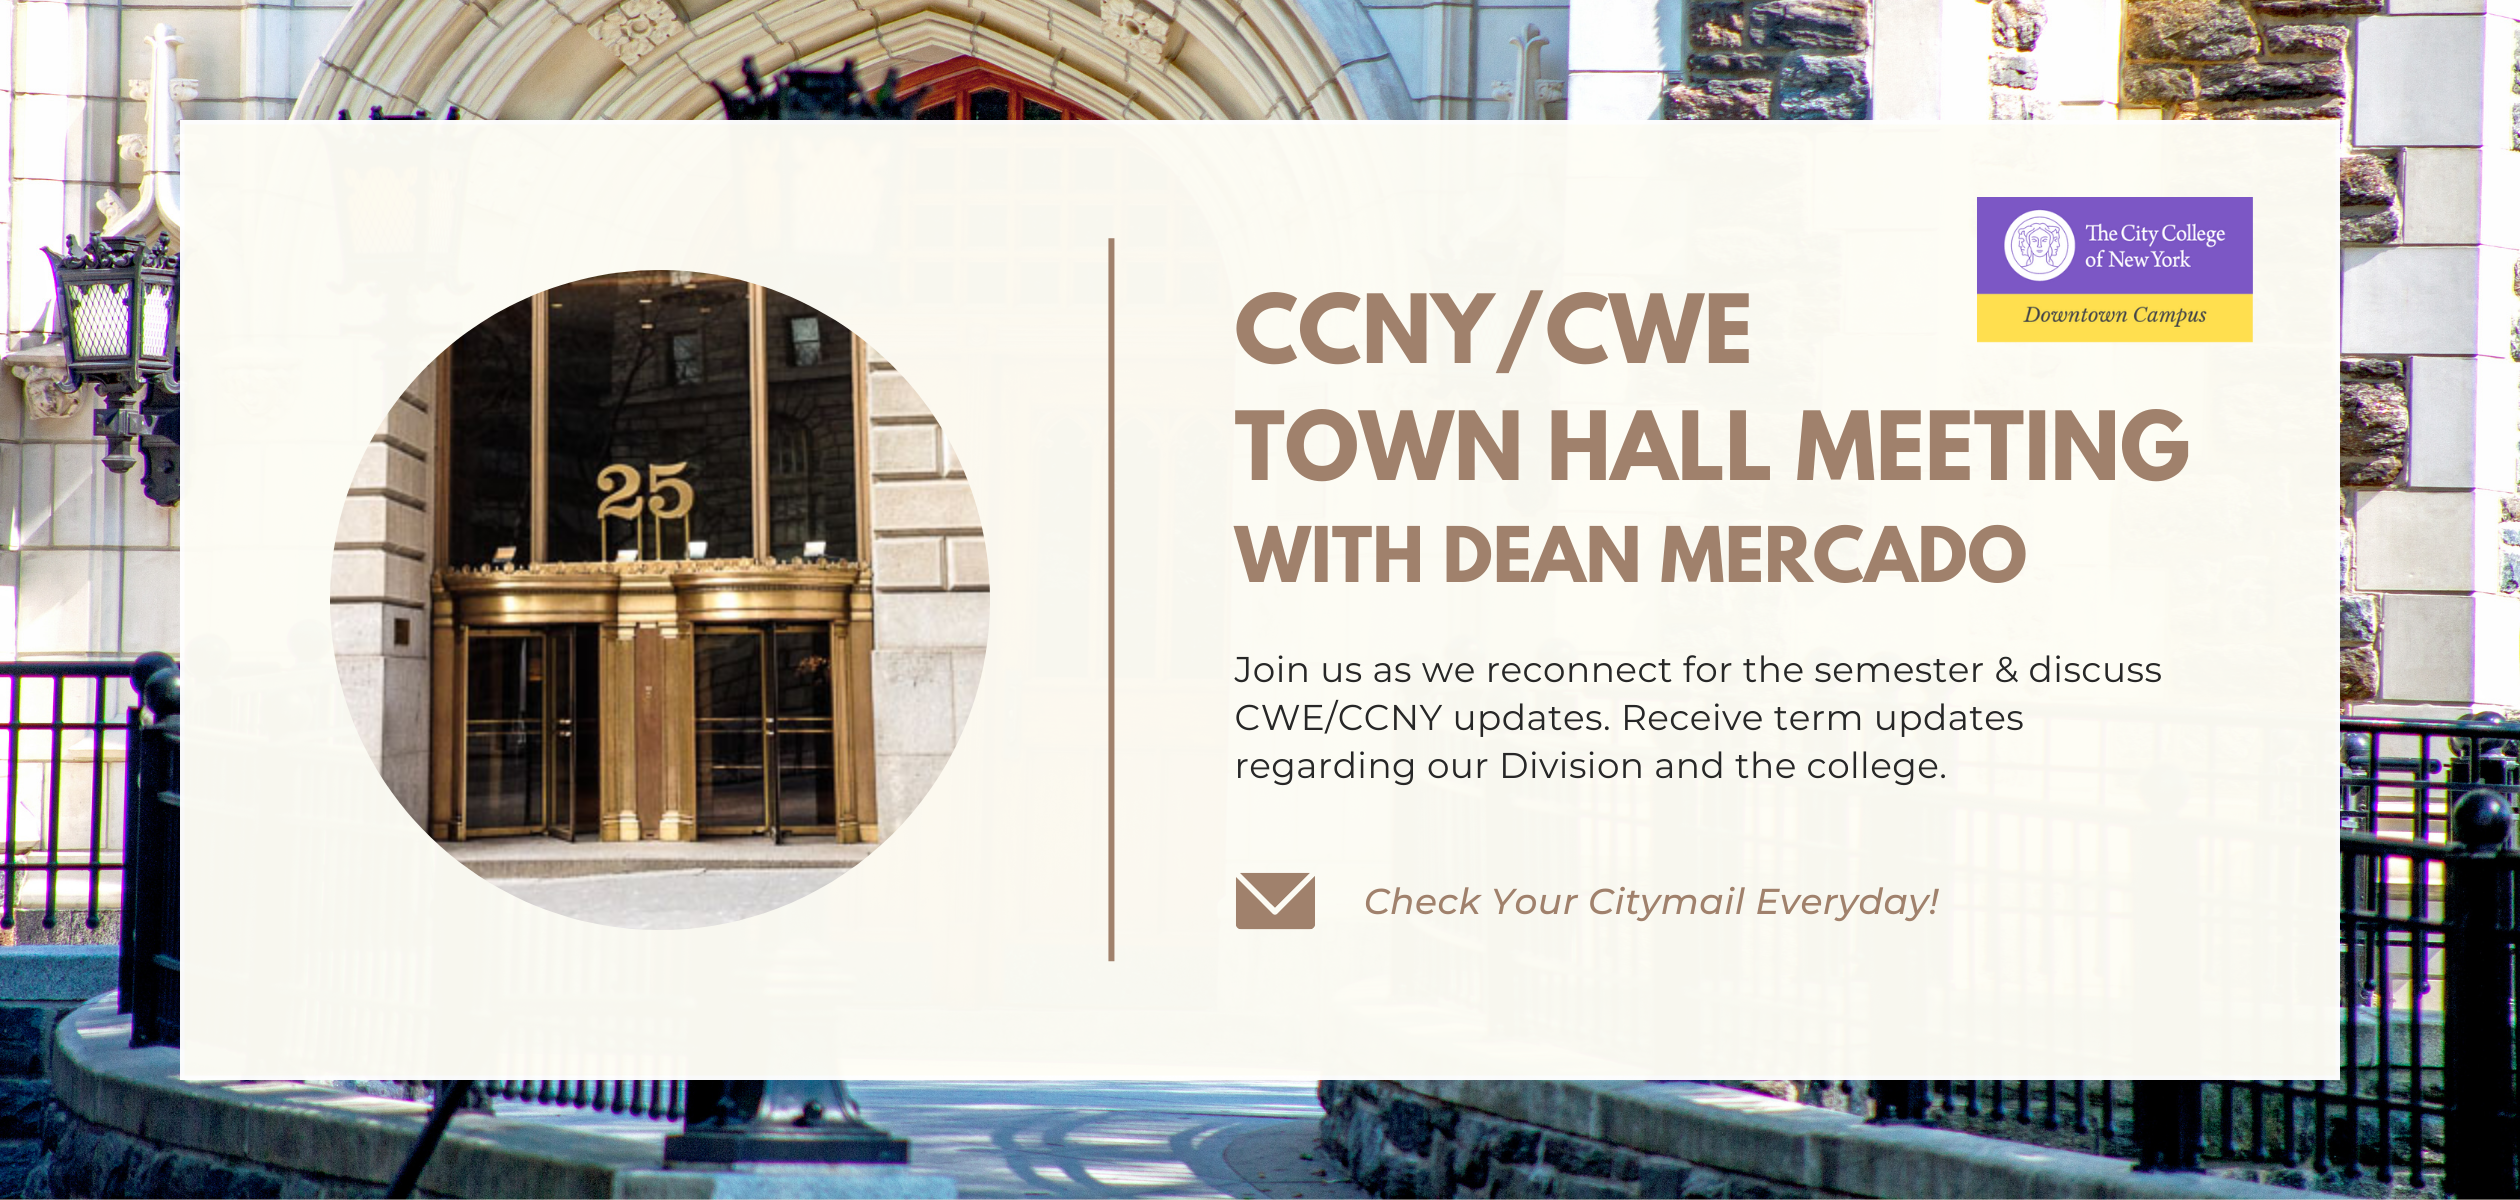 CCNY/CWE Town Hall Meeting